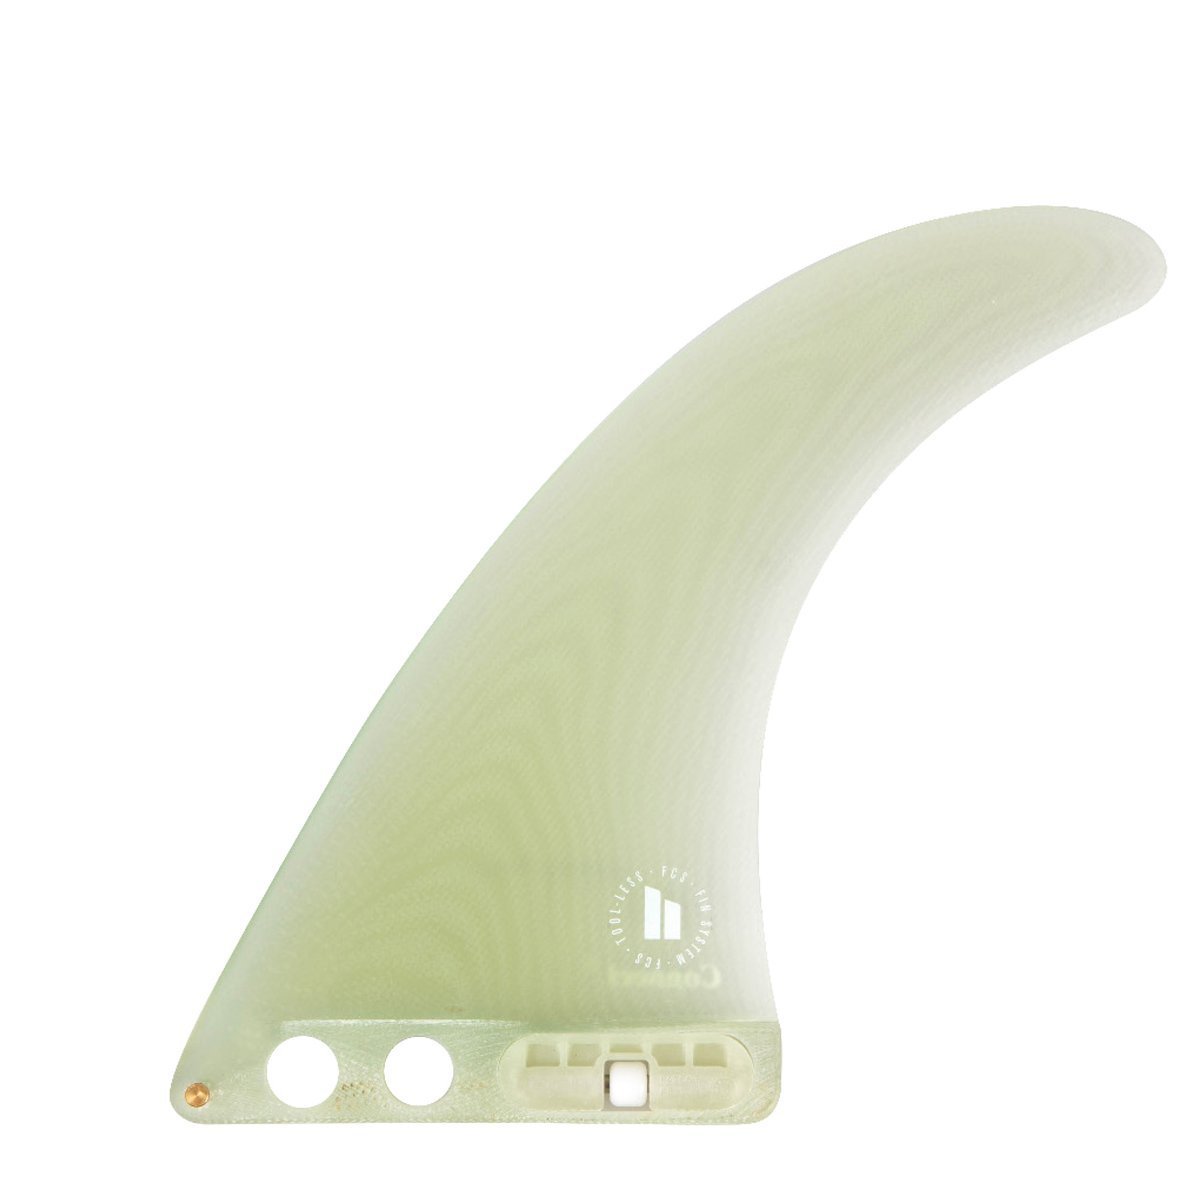 FCS2 エフシーエスツー ロングボード センターフィン 9.0" CONNECT PG LONGBOARD FIN コネクト シングルフィン Black / Clear 2カラー